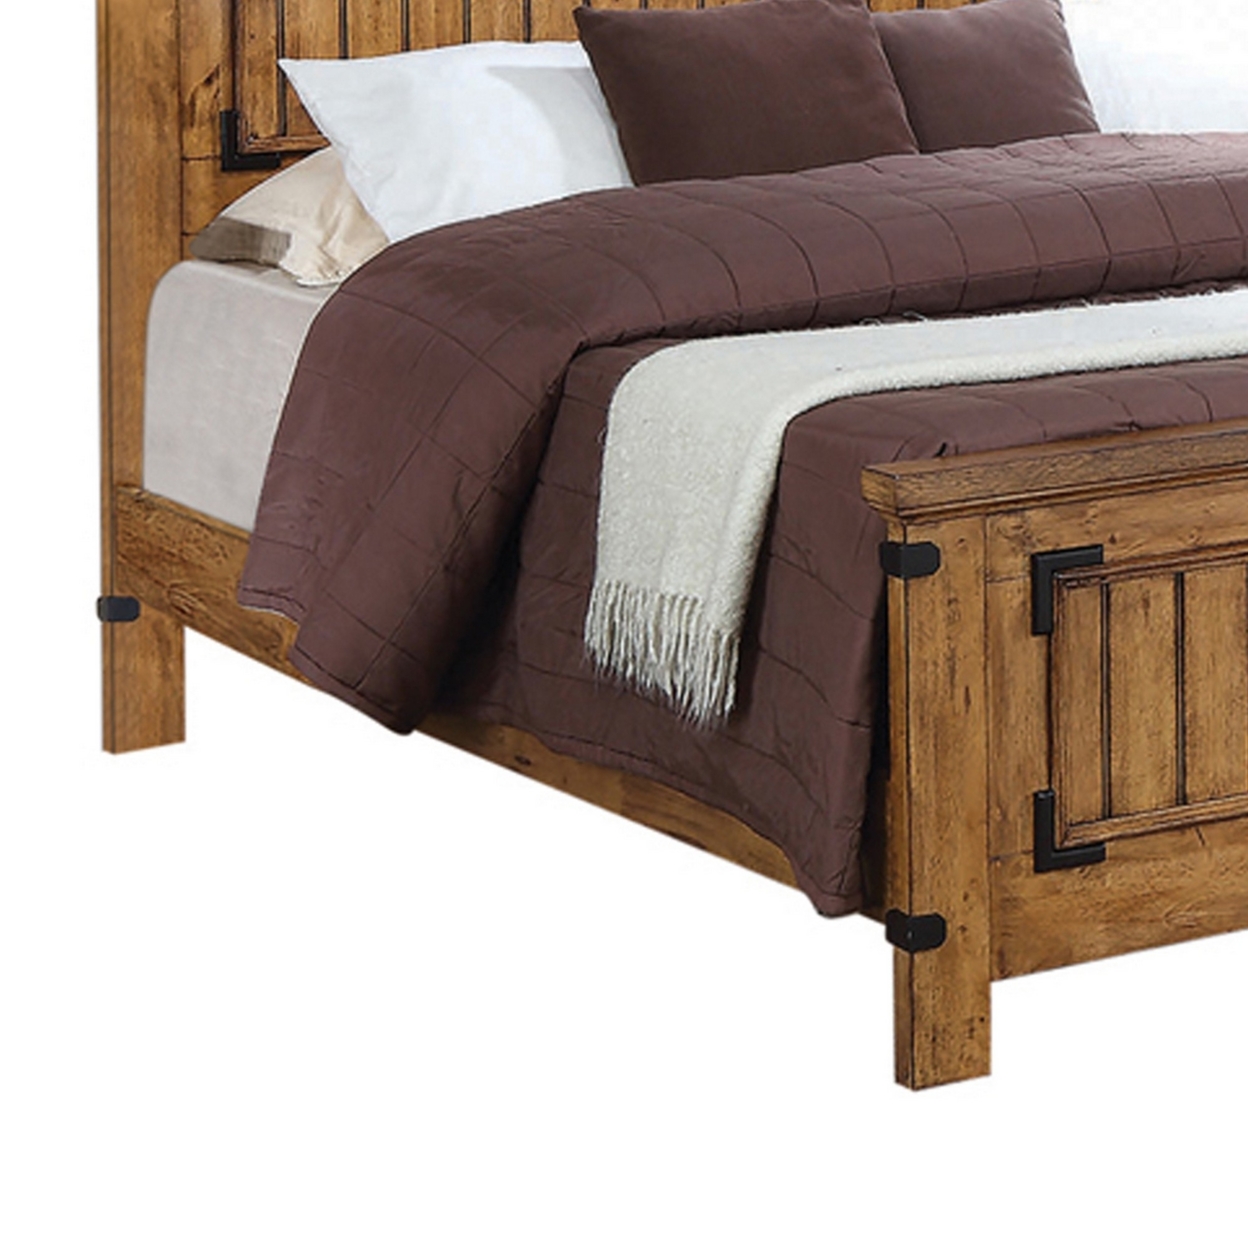 Cottage Style Queen Size Bed With Plank Detailing And Metal Accents, Brown- Saltoro Sherpi